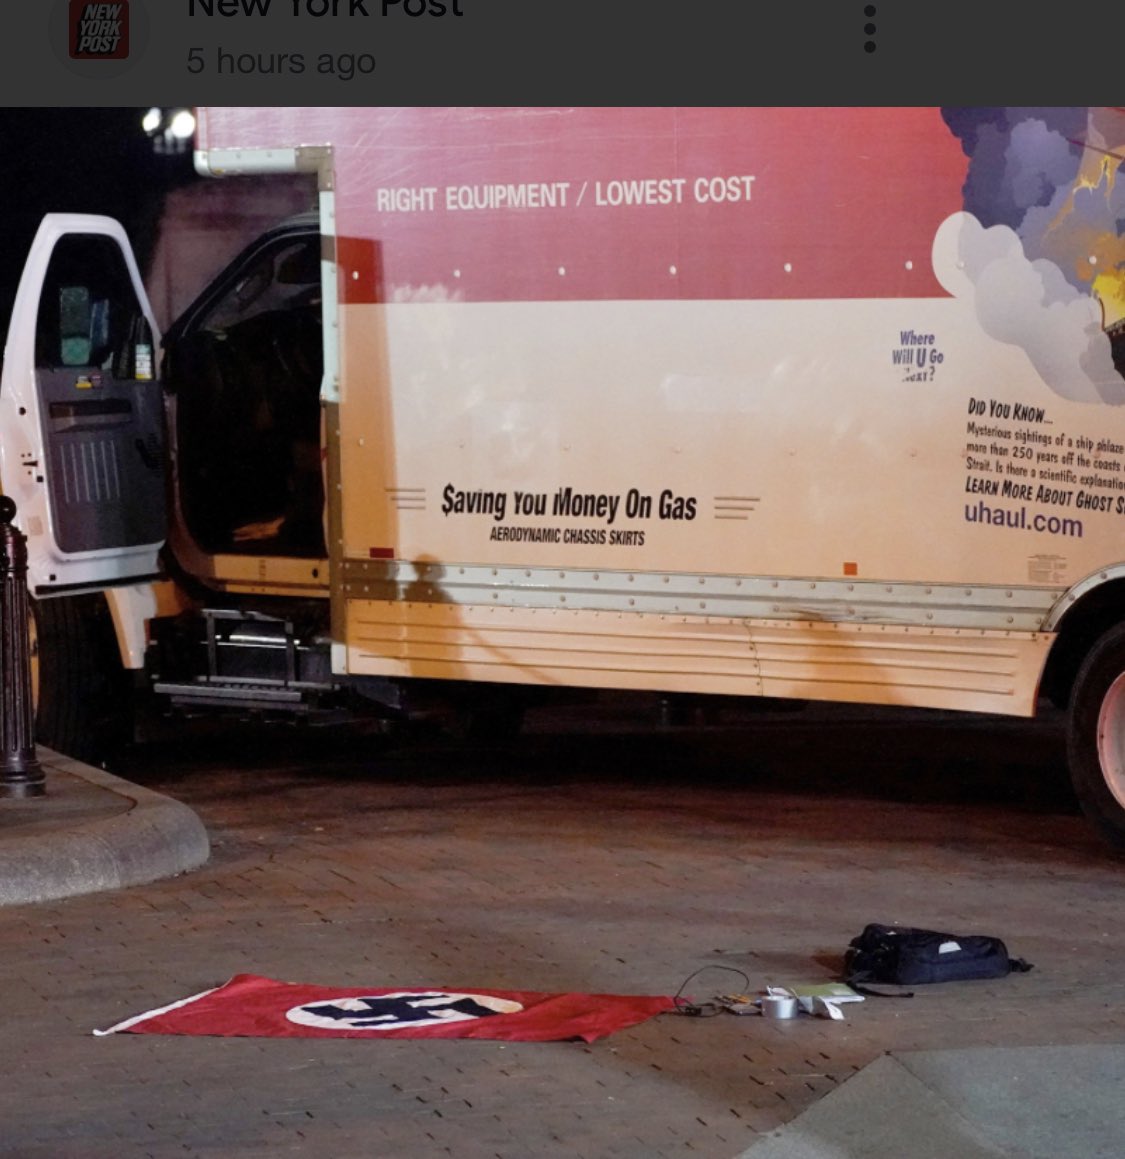 Another Trump/lover gets activated. Neo-Nazi crashes a U-Haul truck into barriers protecting the White House. A flag bearing a swastika was found in the truck and whoever this suspect is wanted to kill Joe Biden. Great work, Republicans.